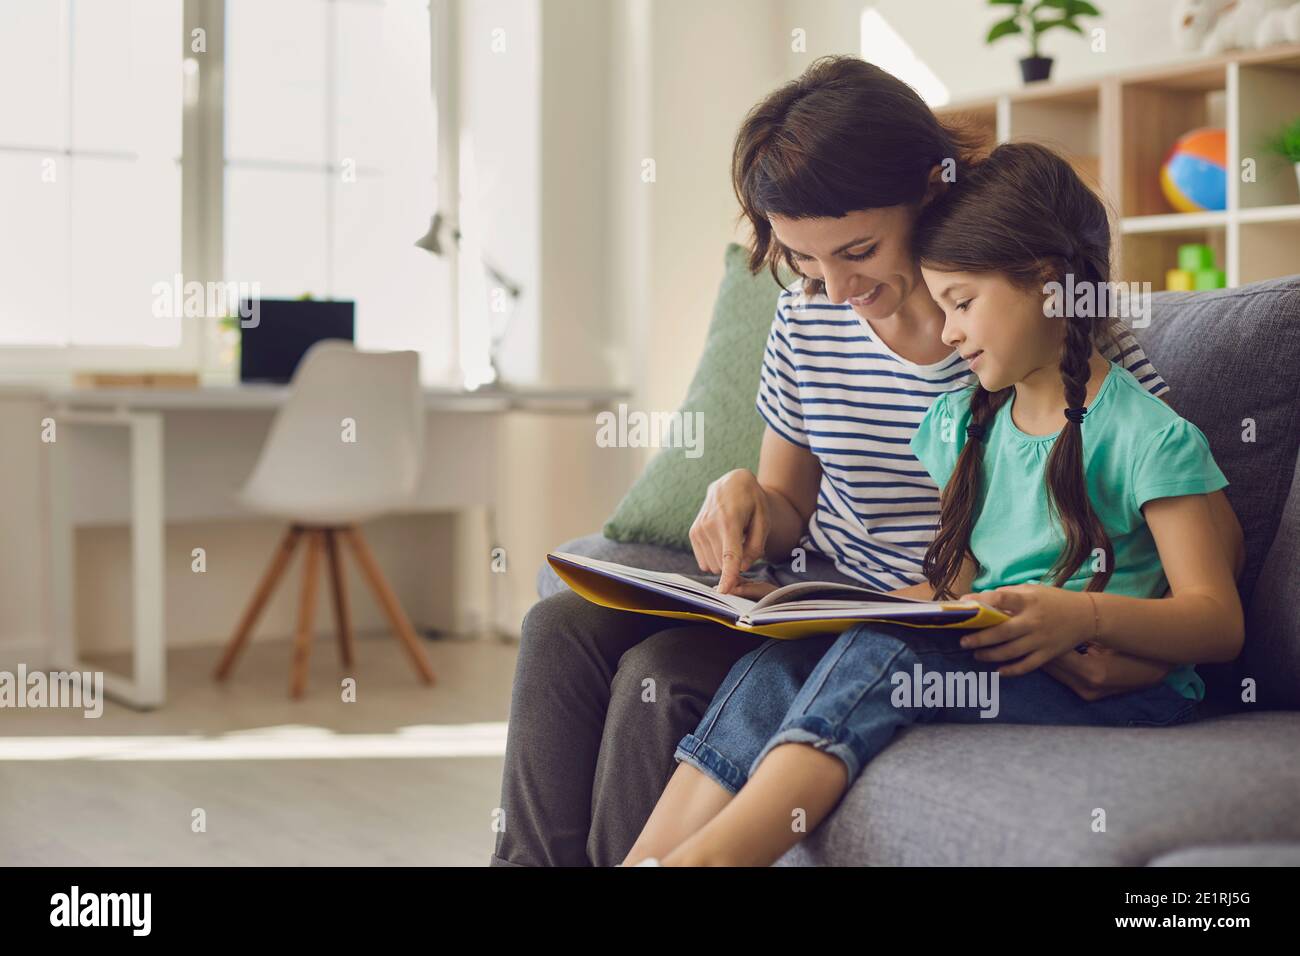 Charming mother is showing images in a book to her cute little daughter at home. Stock Photo